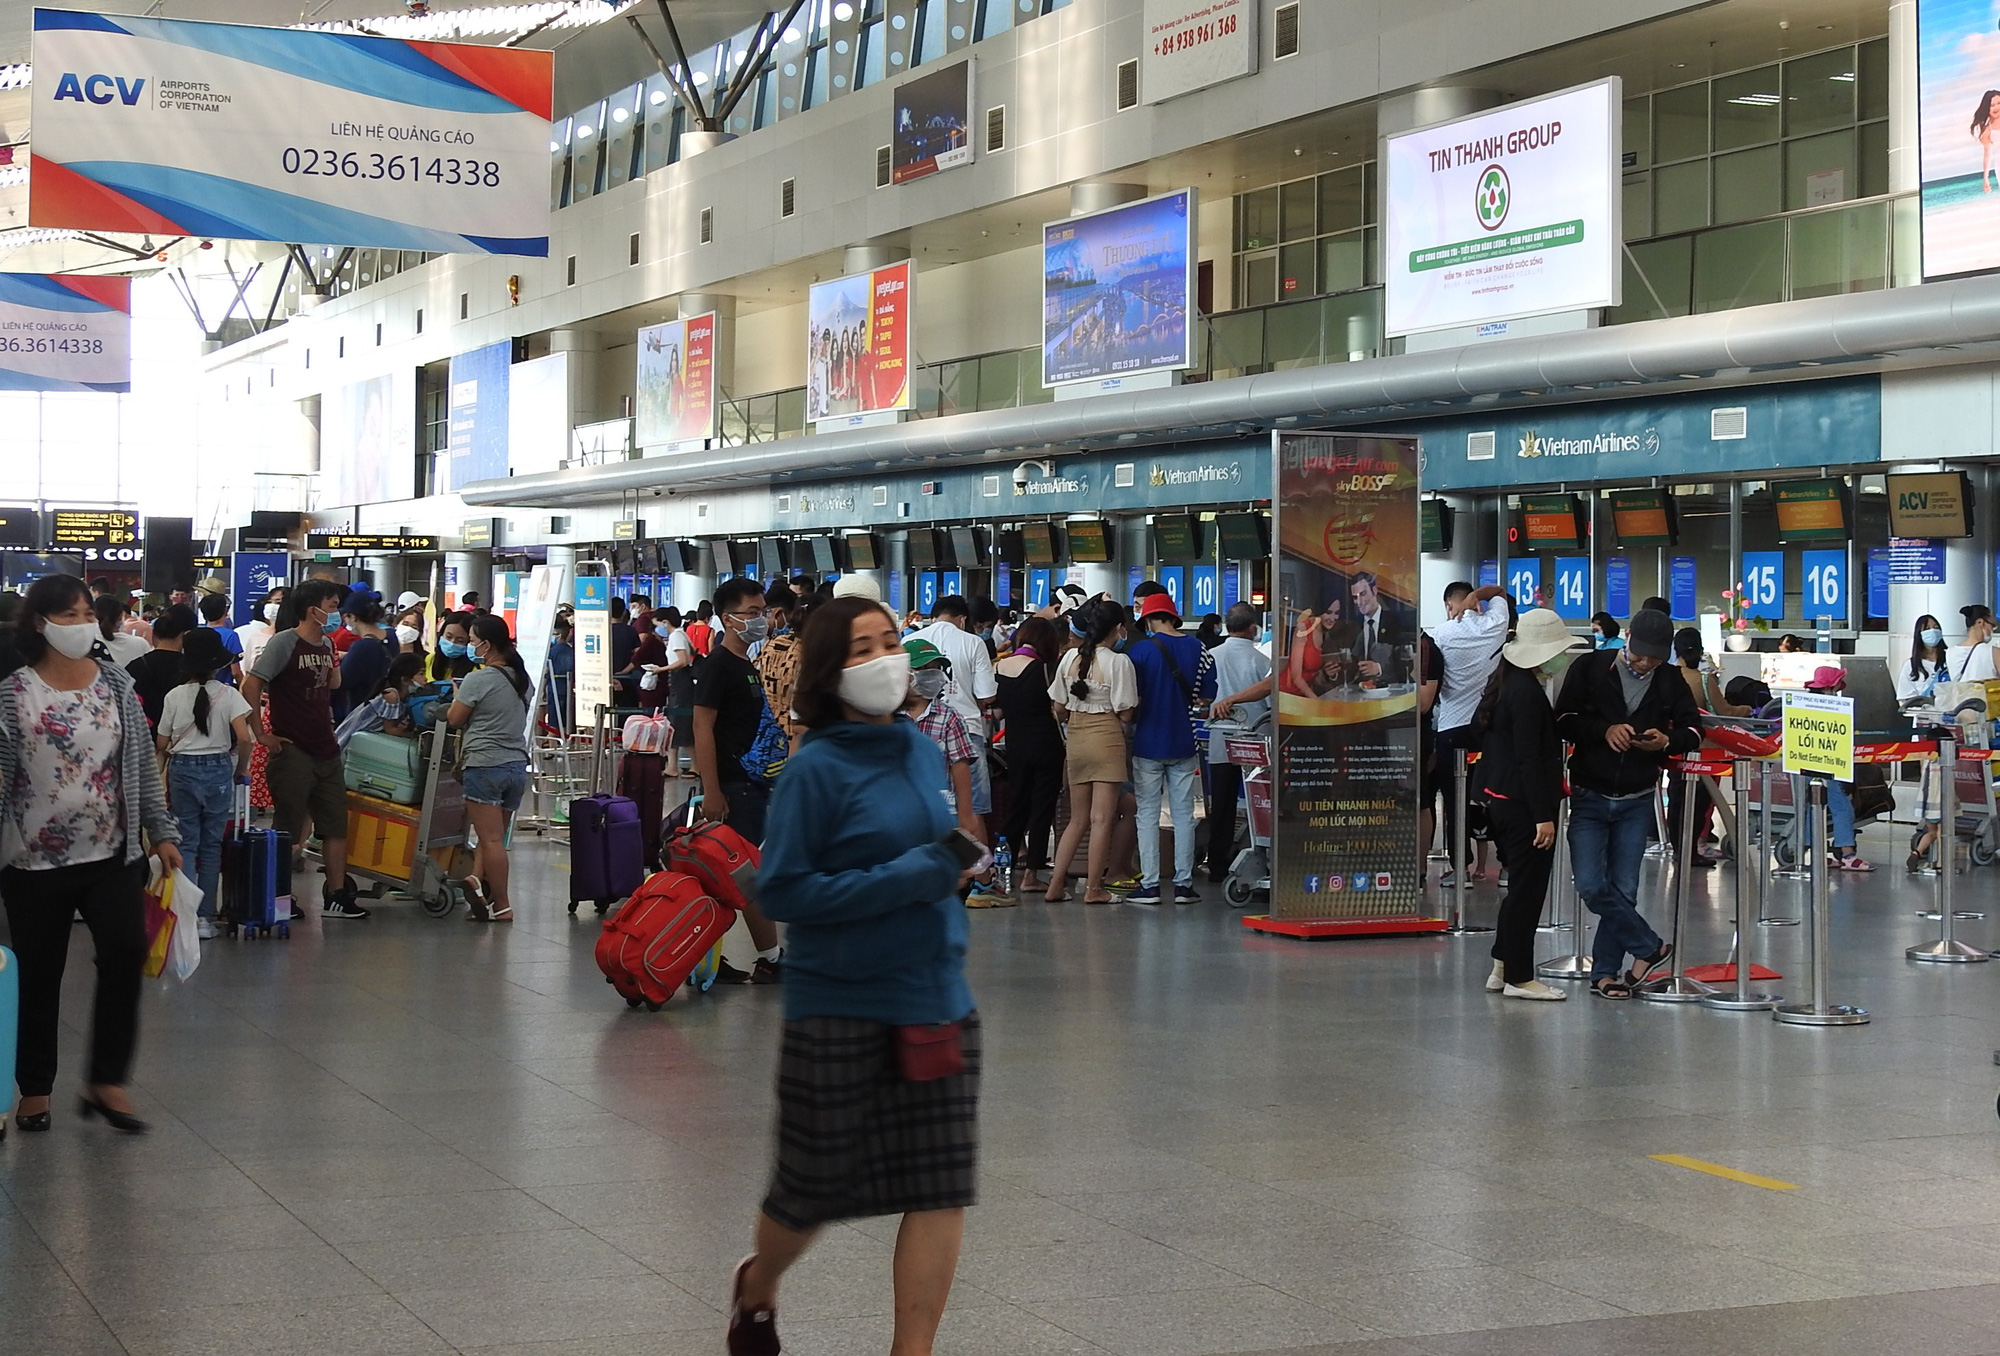 Authorities propose resumption of passenger transport to, from Da Nang